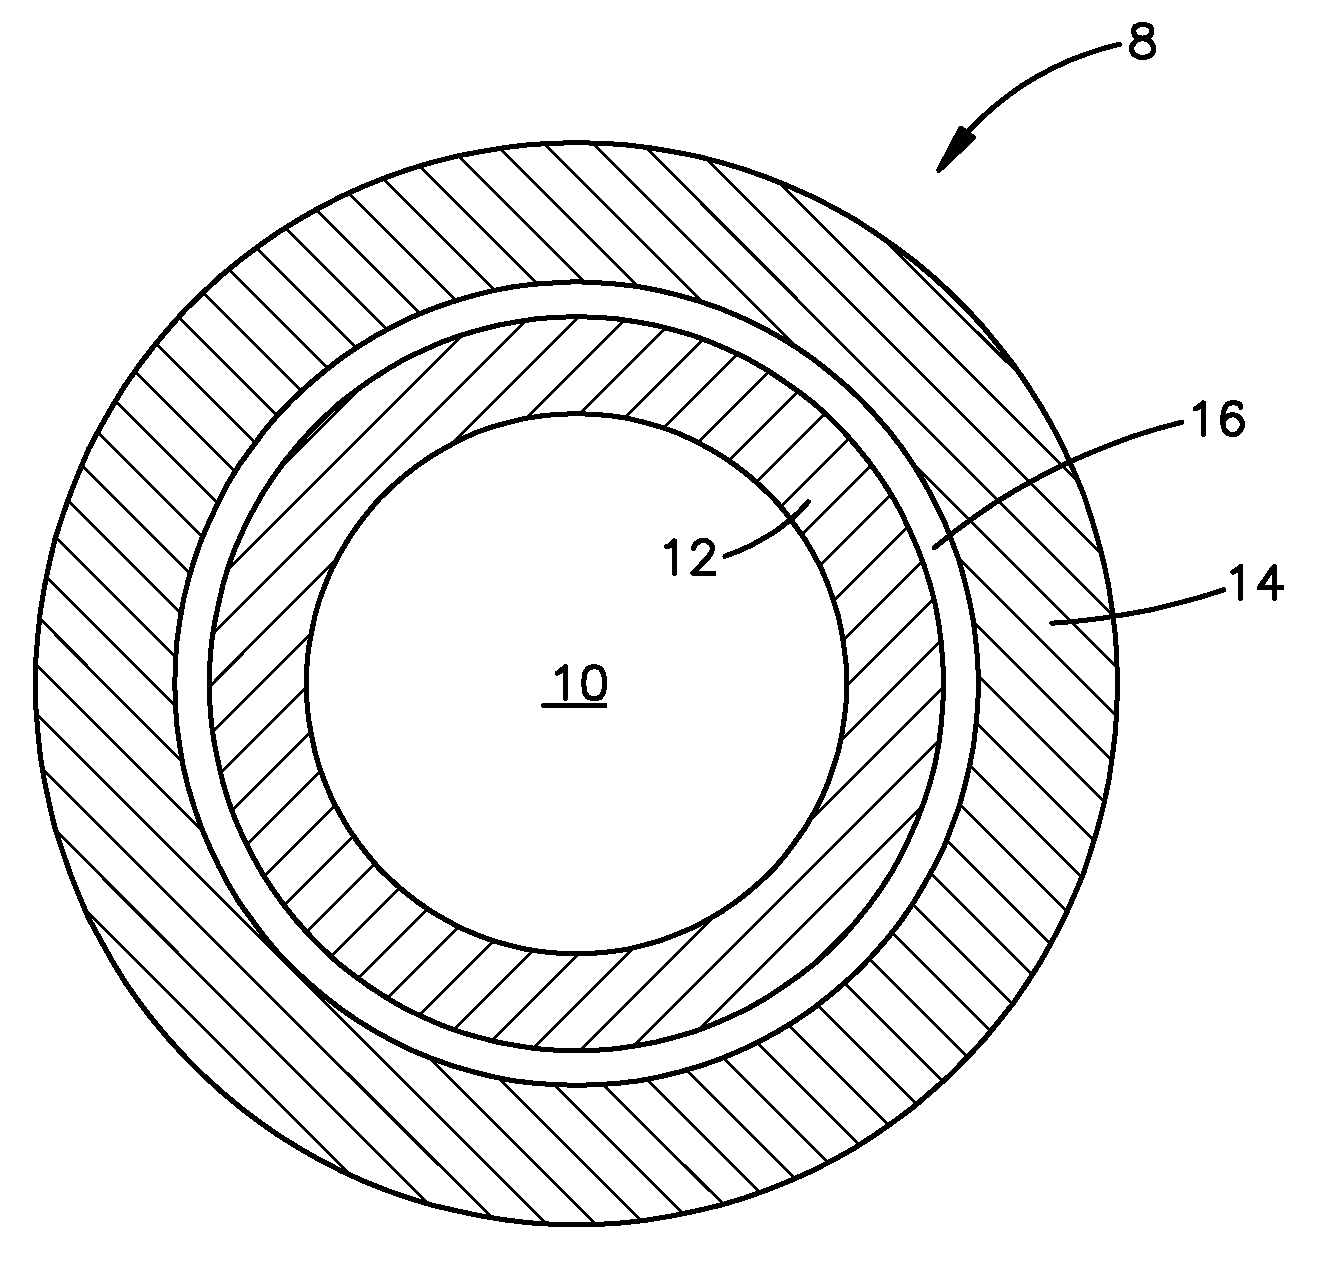 Microencapsulated Oil Product and Method of Making Same